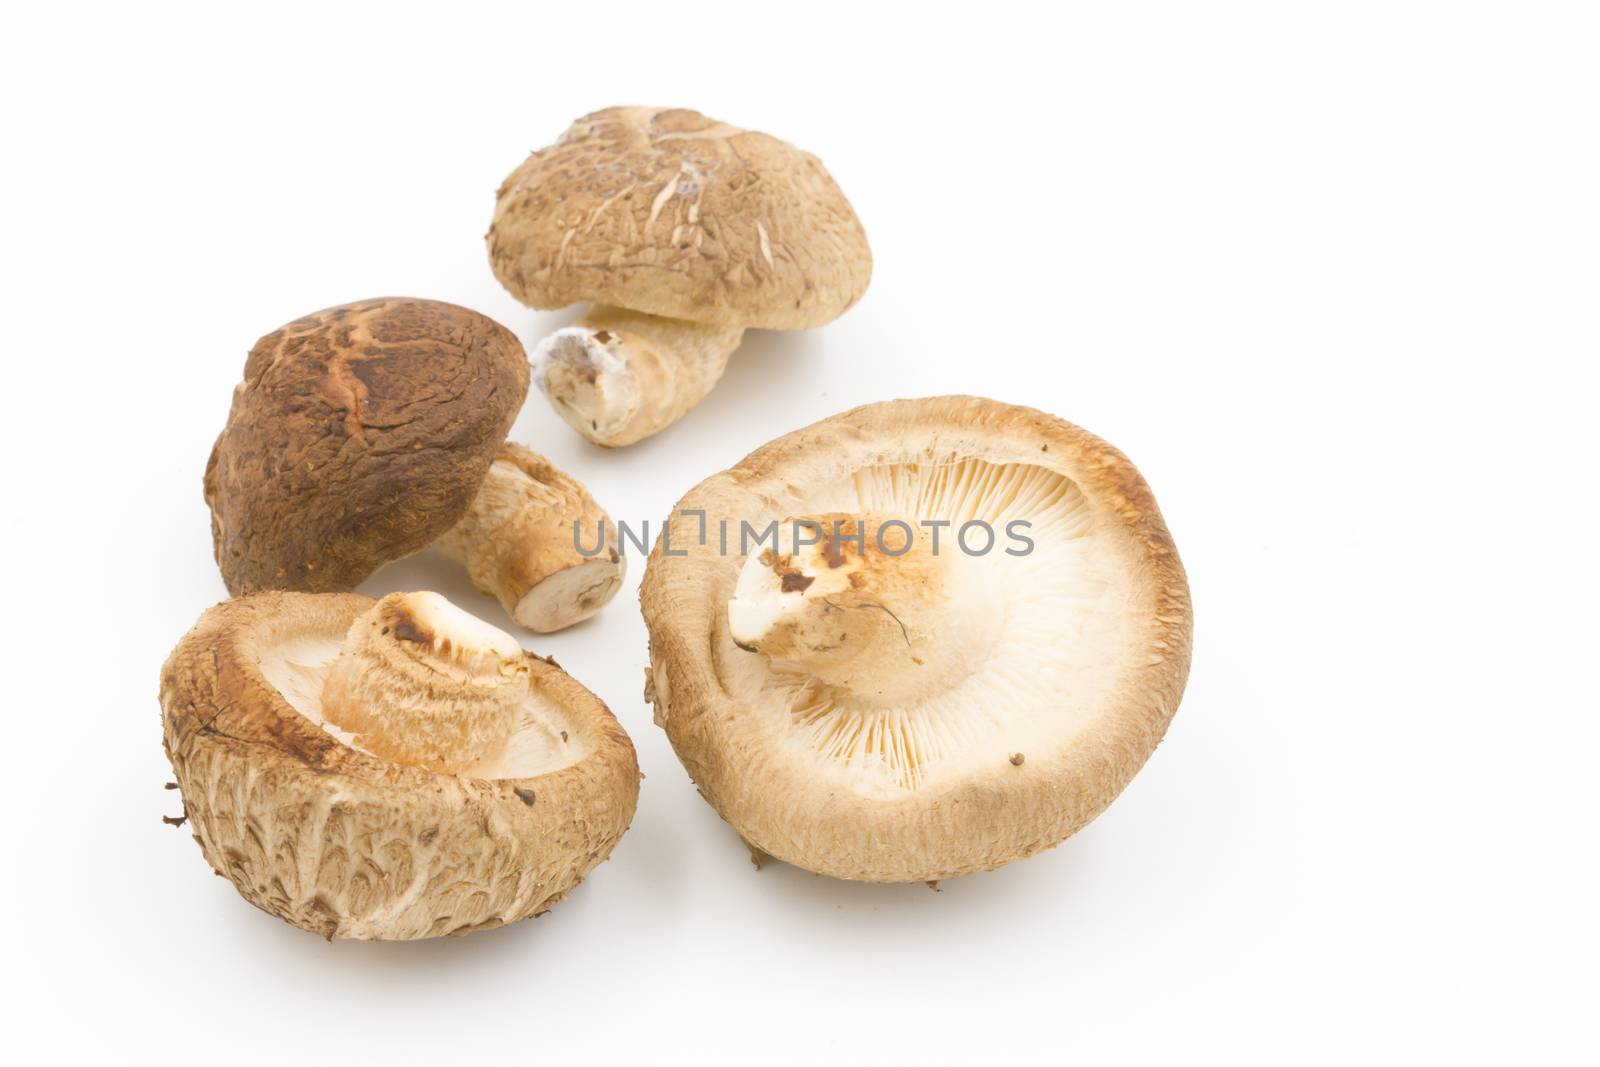 Shiitake mushroom on the White background  by ronnarong